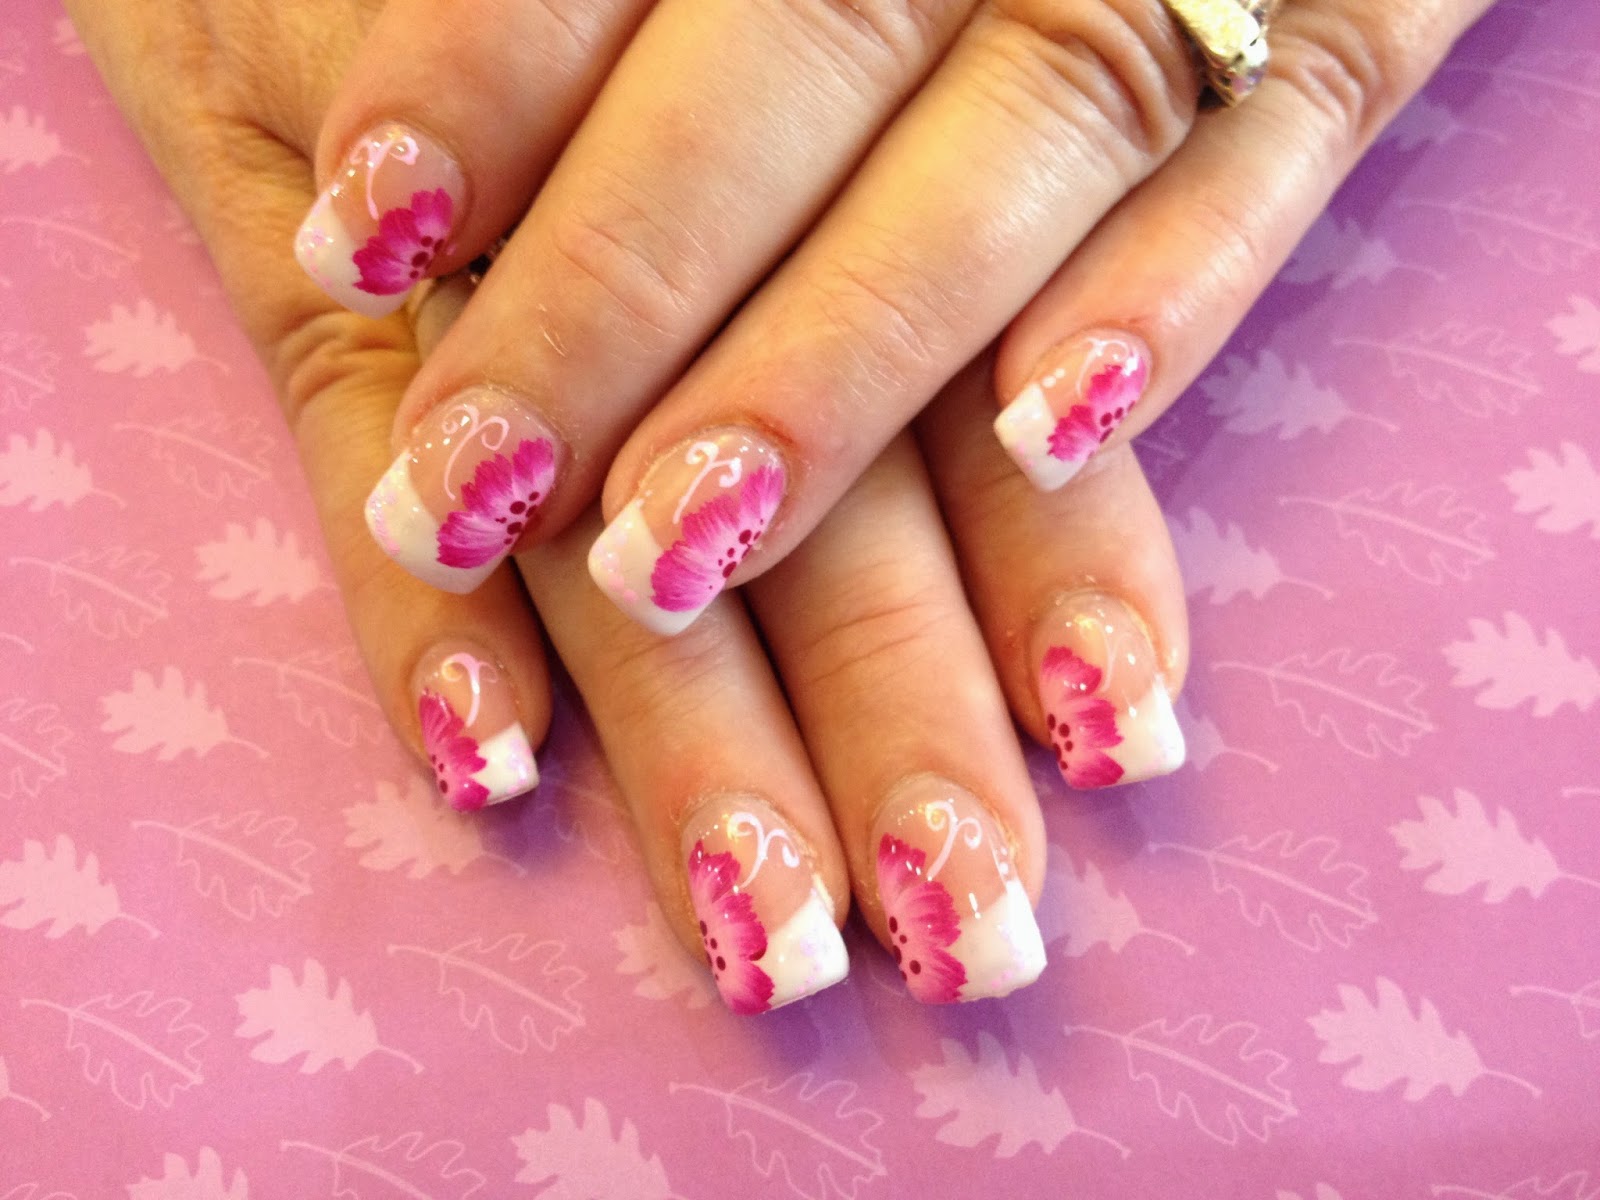 French Manicure with Floral Design on Pinterest - wide 6